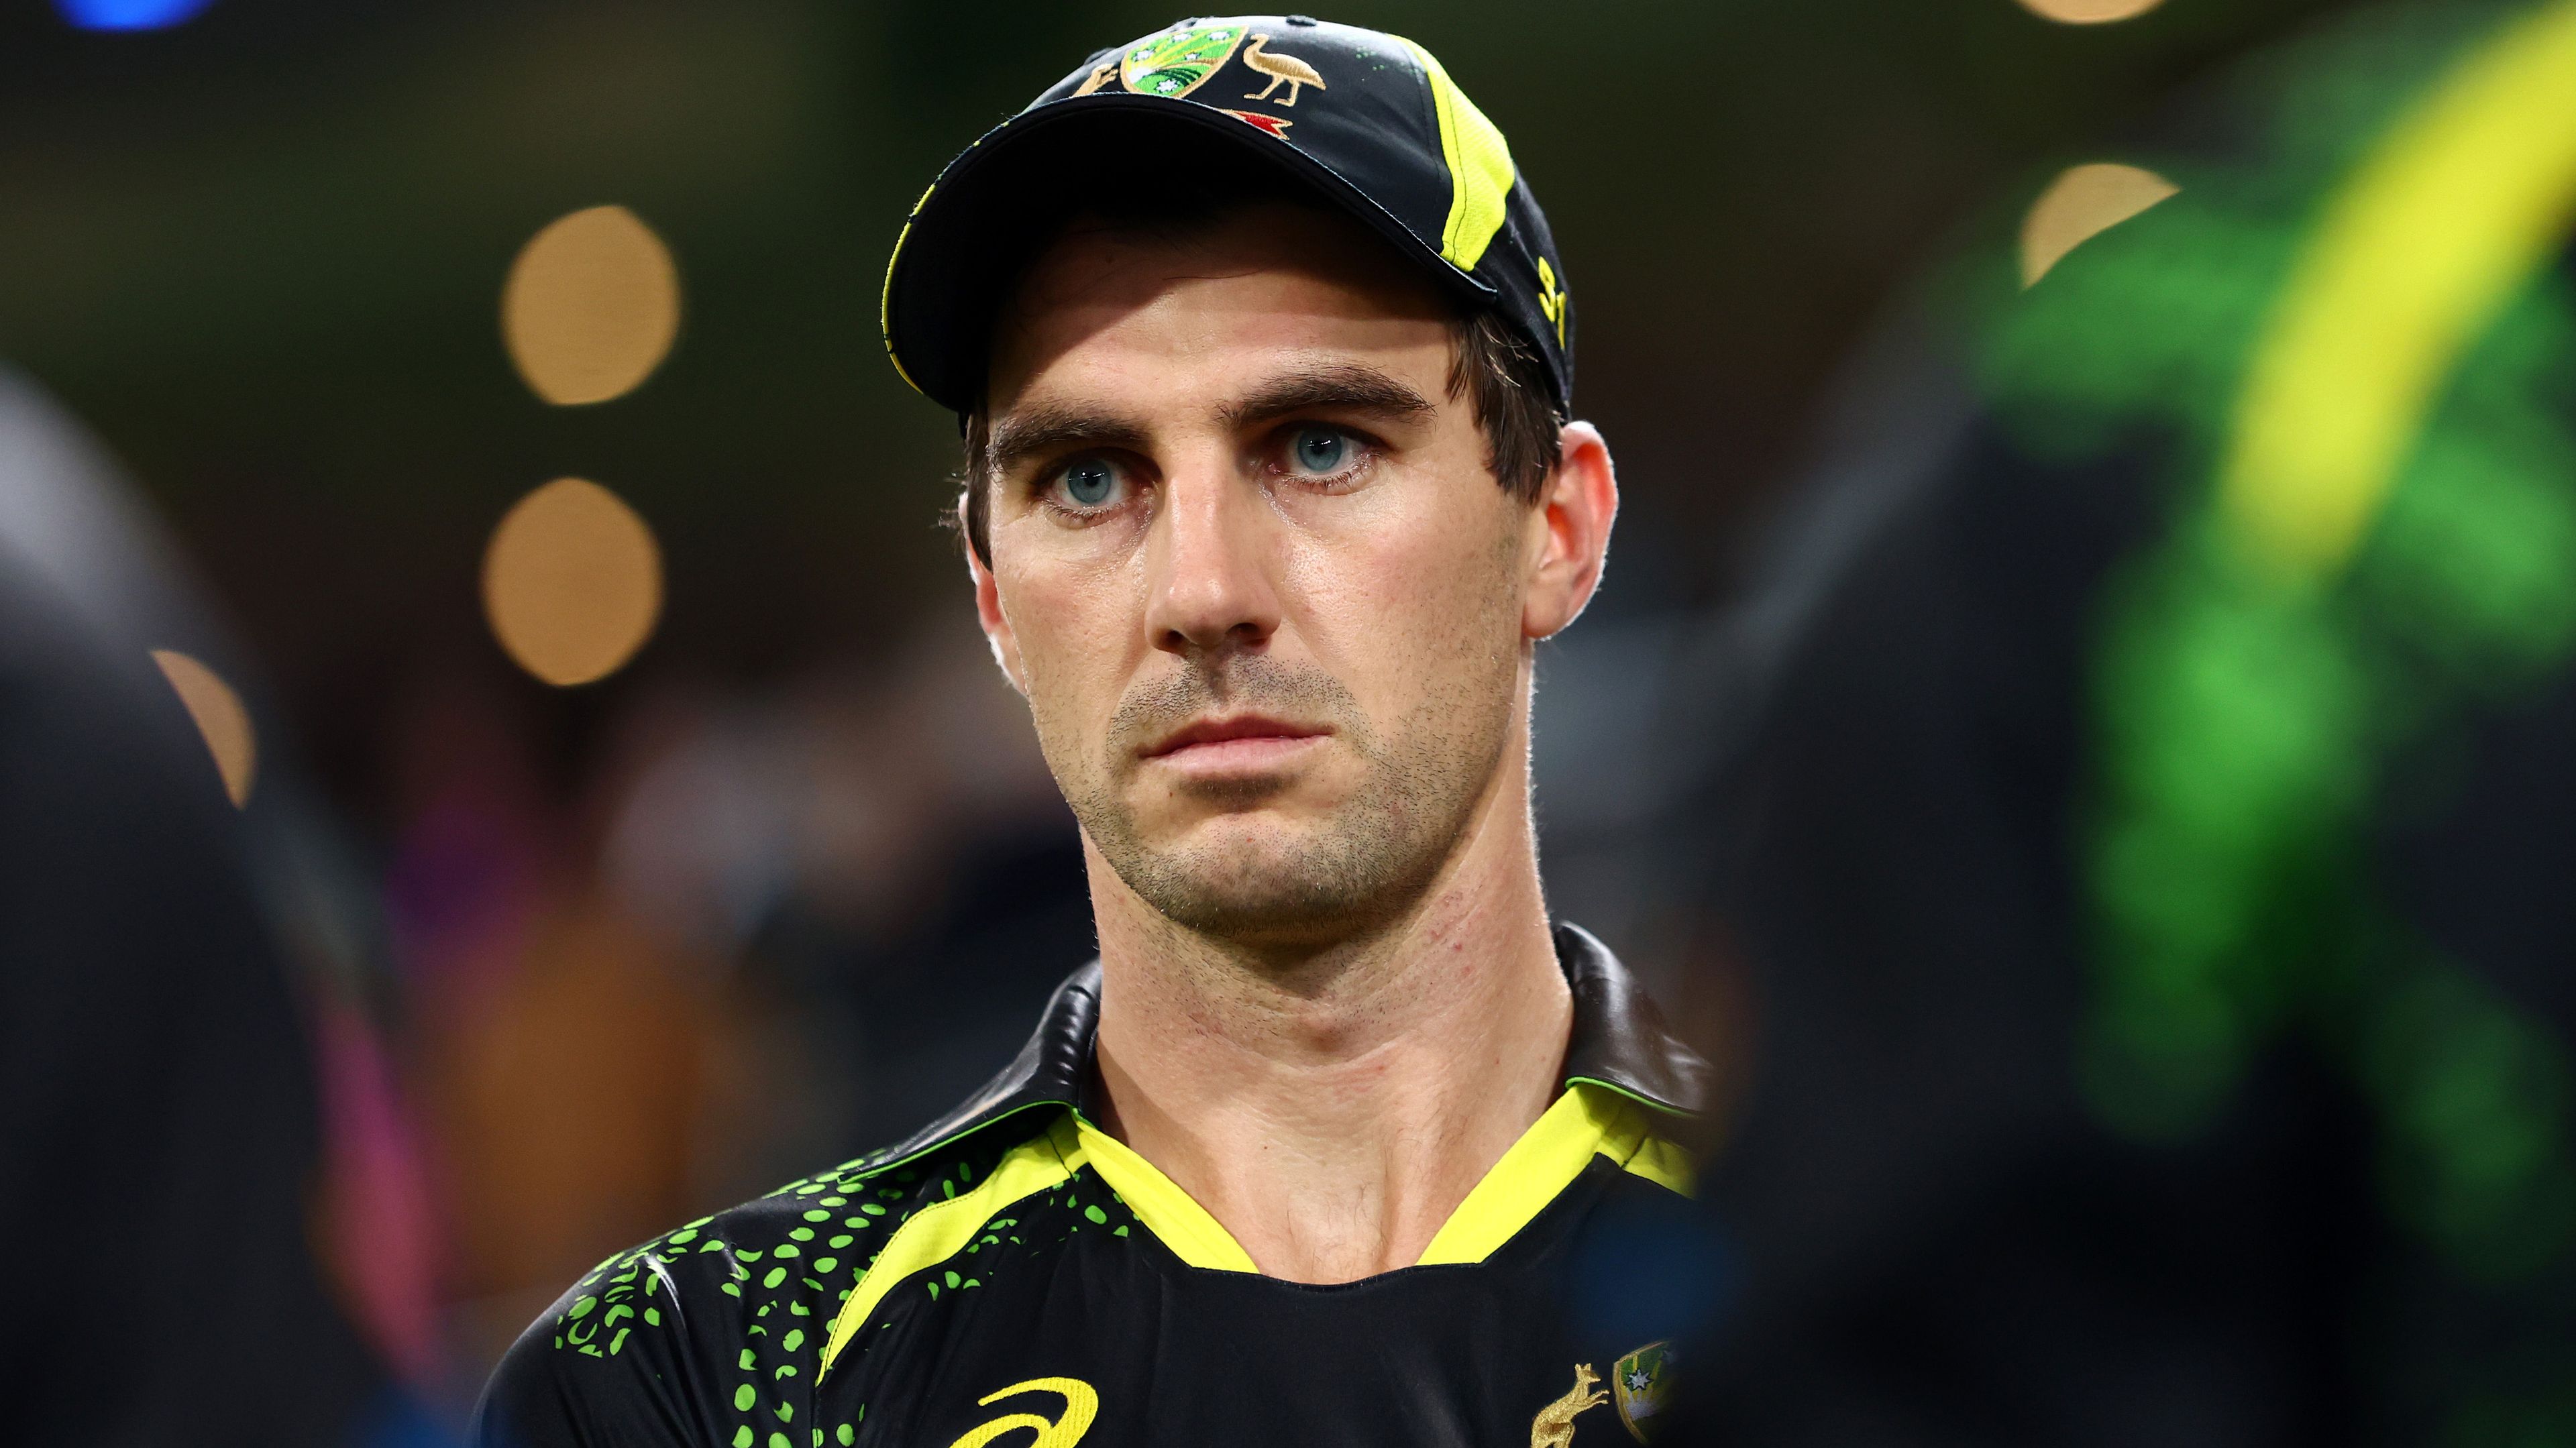 Pat Cummins of Australia looks on during game two of the T20 International Series between Australia and the West Indies at The Gabba on October 07, 2022 in Brisbane, Australia. (Photo by Chris Hyde - CA/Cricket Australia via Getty Images)